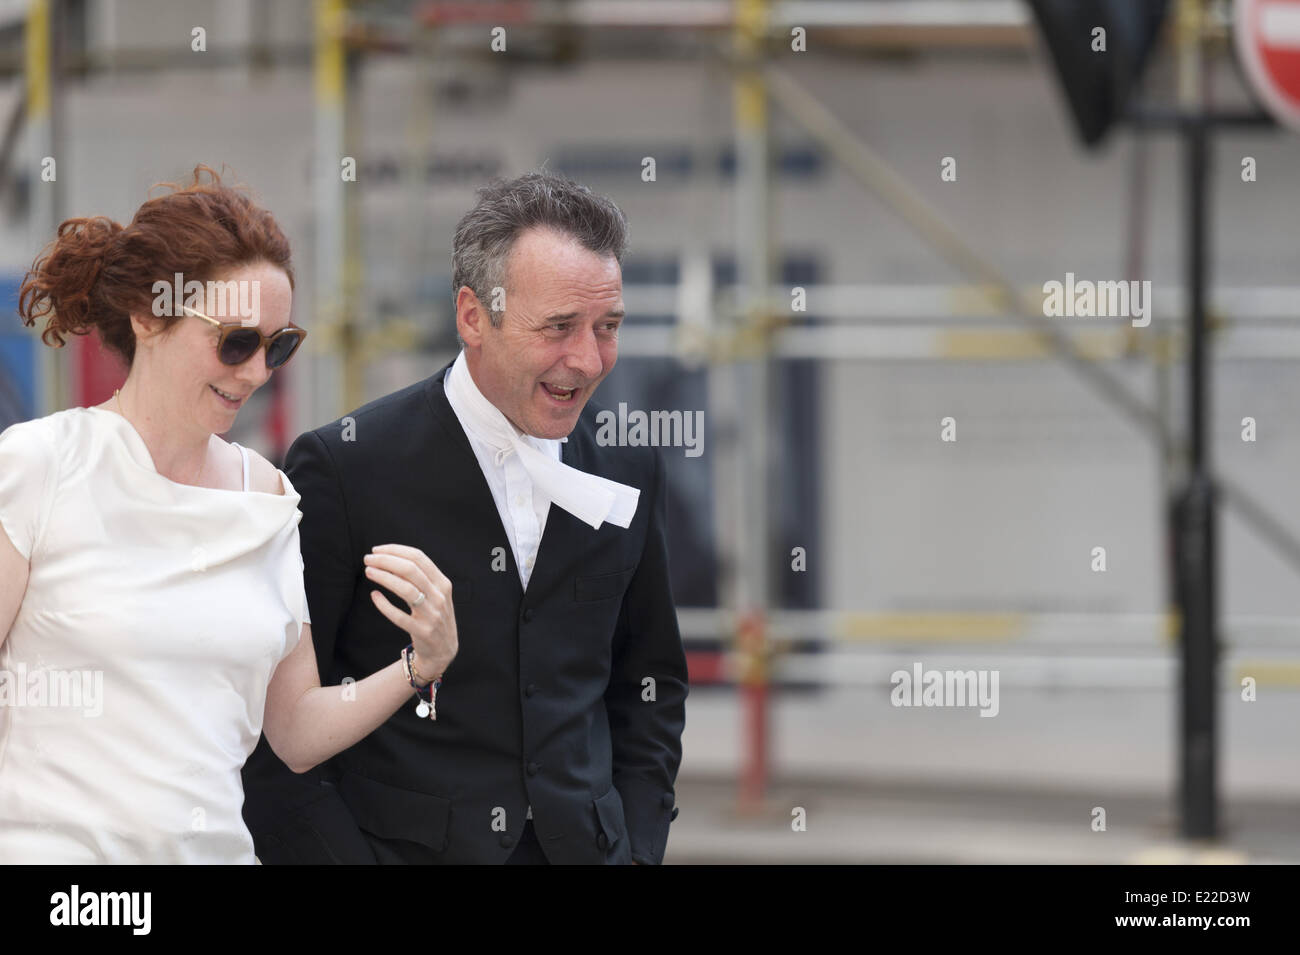 London, UK. 13th June, 2014. Former CEO of News International, Rebekah Brooks, together with her barrister, Jonathan LaidlawÂ QC, leave the Old Bailey as the jury in the phone-hacking trial continues to consider the verdicts. © Lee Thomas/ZUMA Wire/ZUMAPRESS.com/Alamy Live News Stock Photo